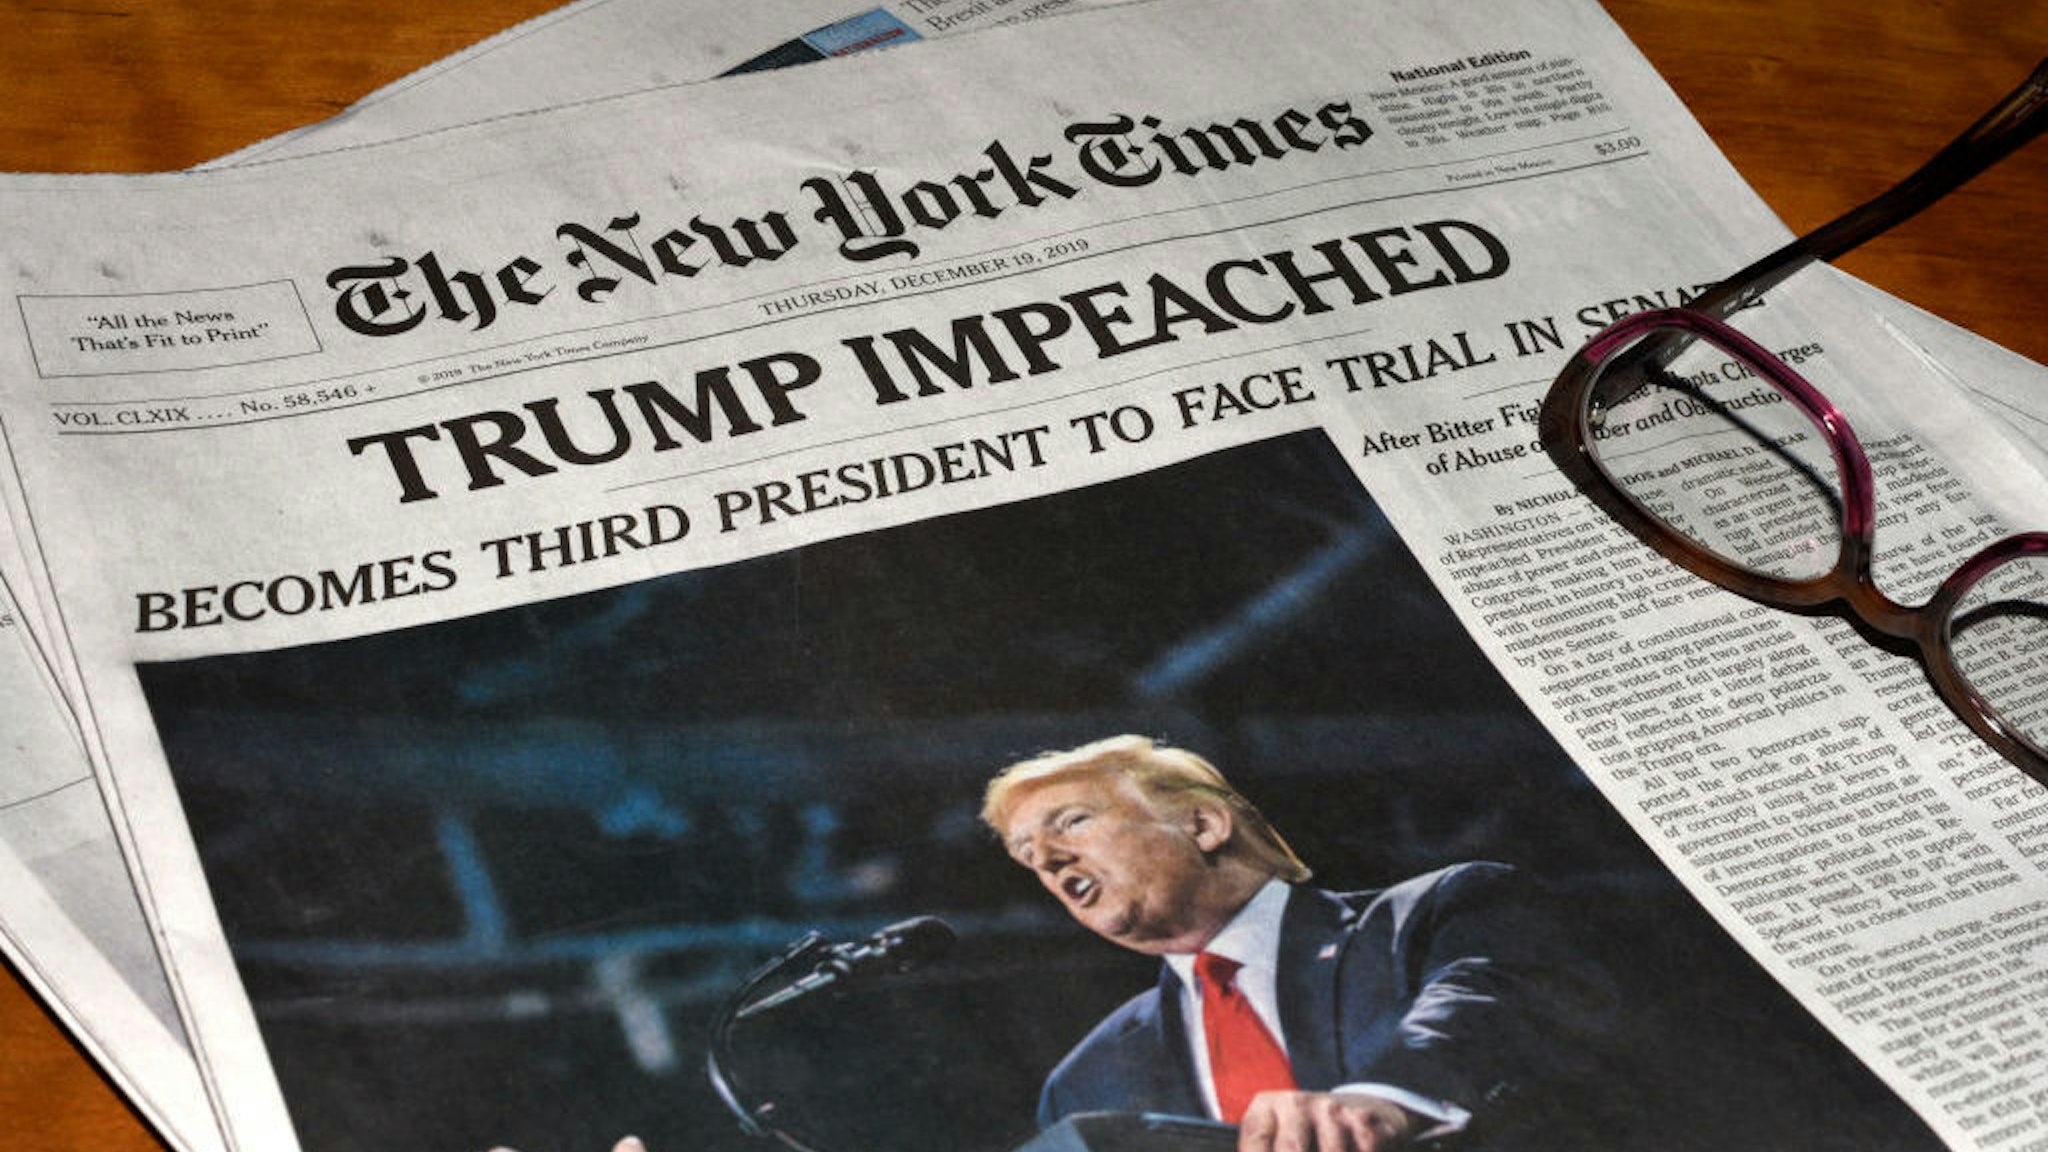 The December 19, 2019 edition of The New York Times carries a headline ‘Trump Impeached’. (Photo by Robert Alexander/Getty Images)